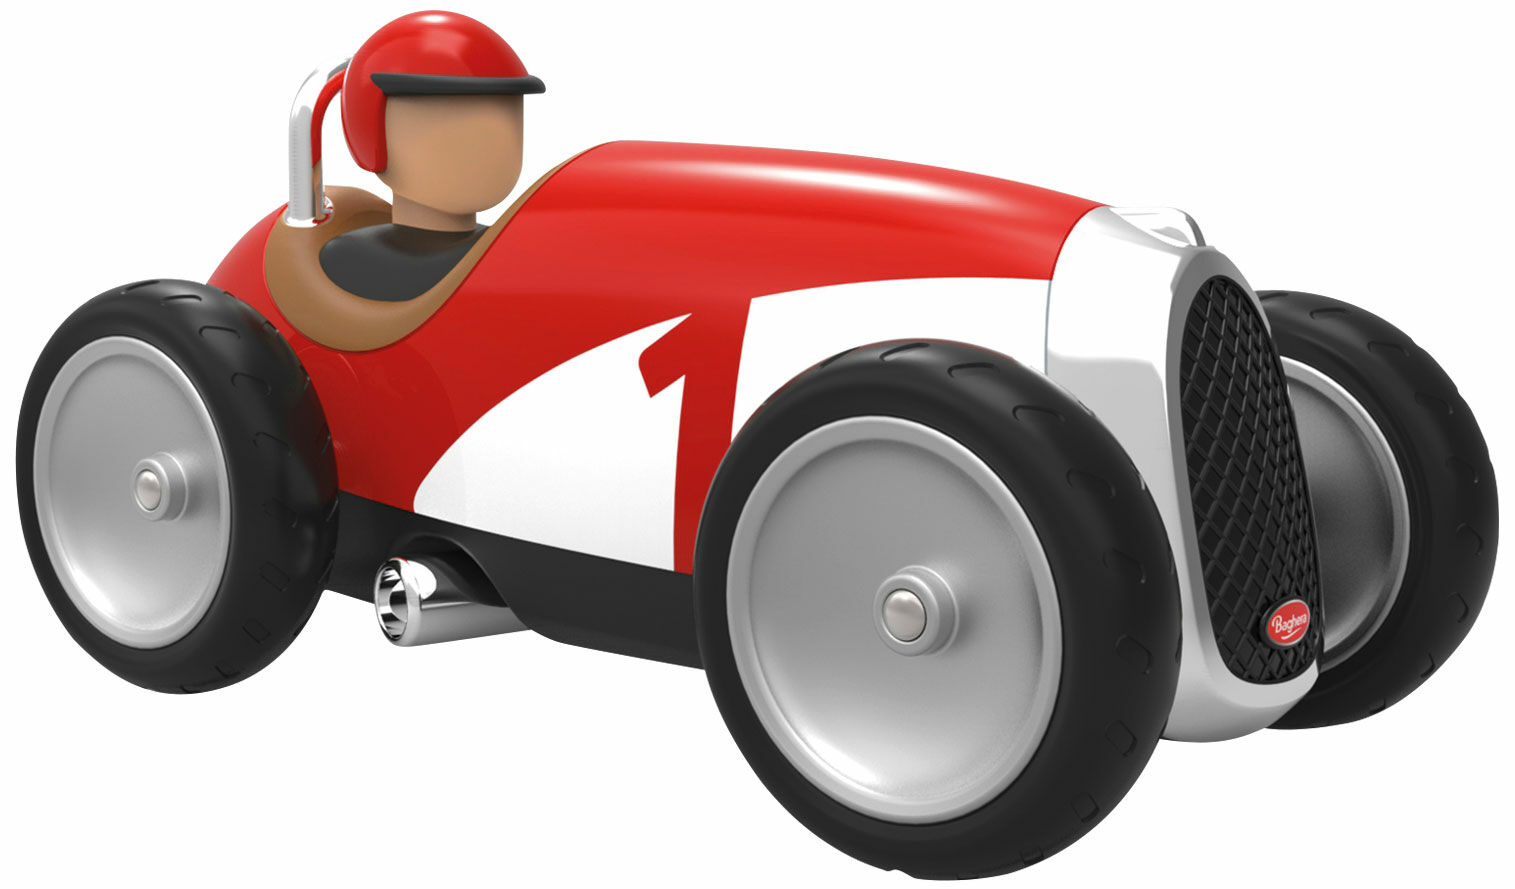 Toy car "Racing Car", red version by Baghera